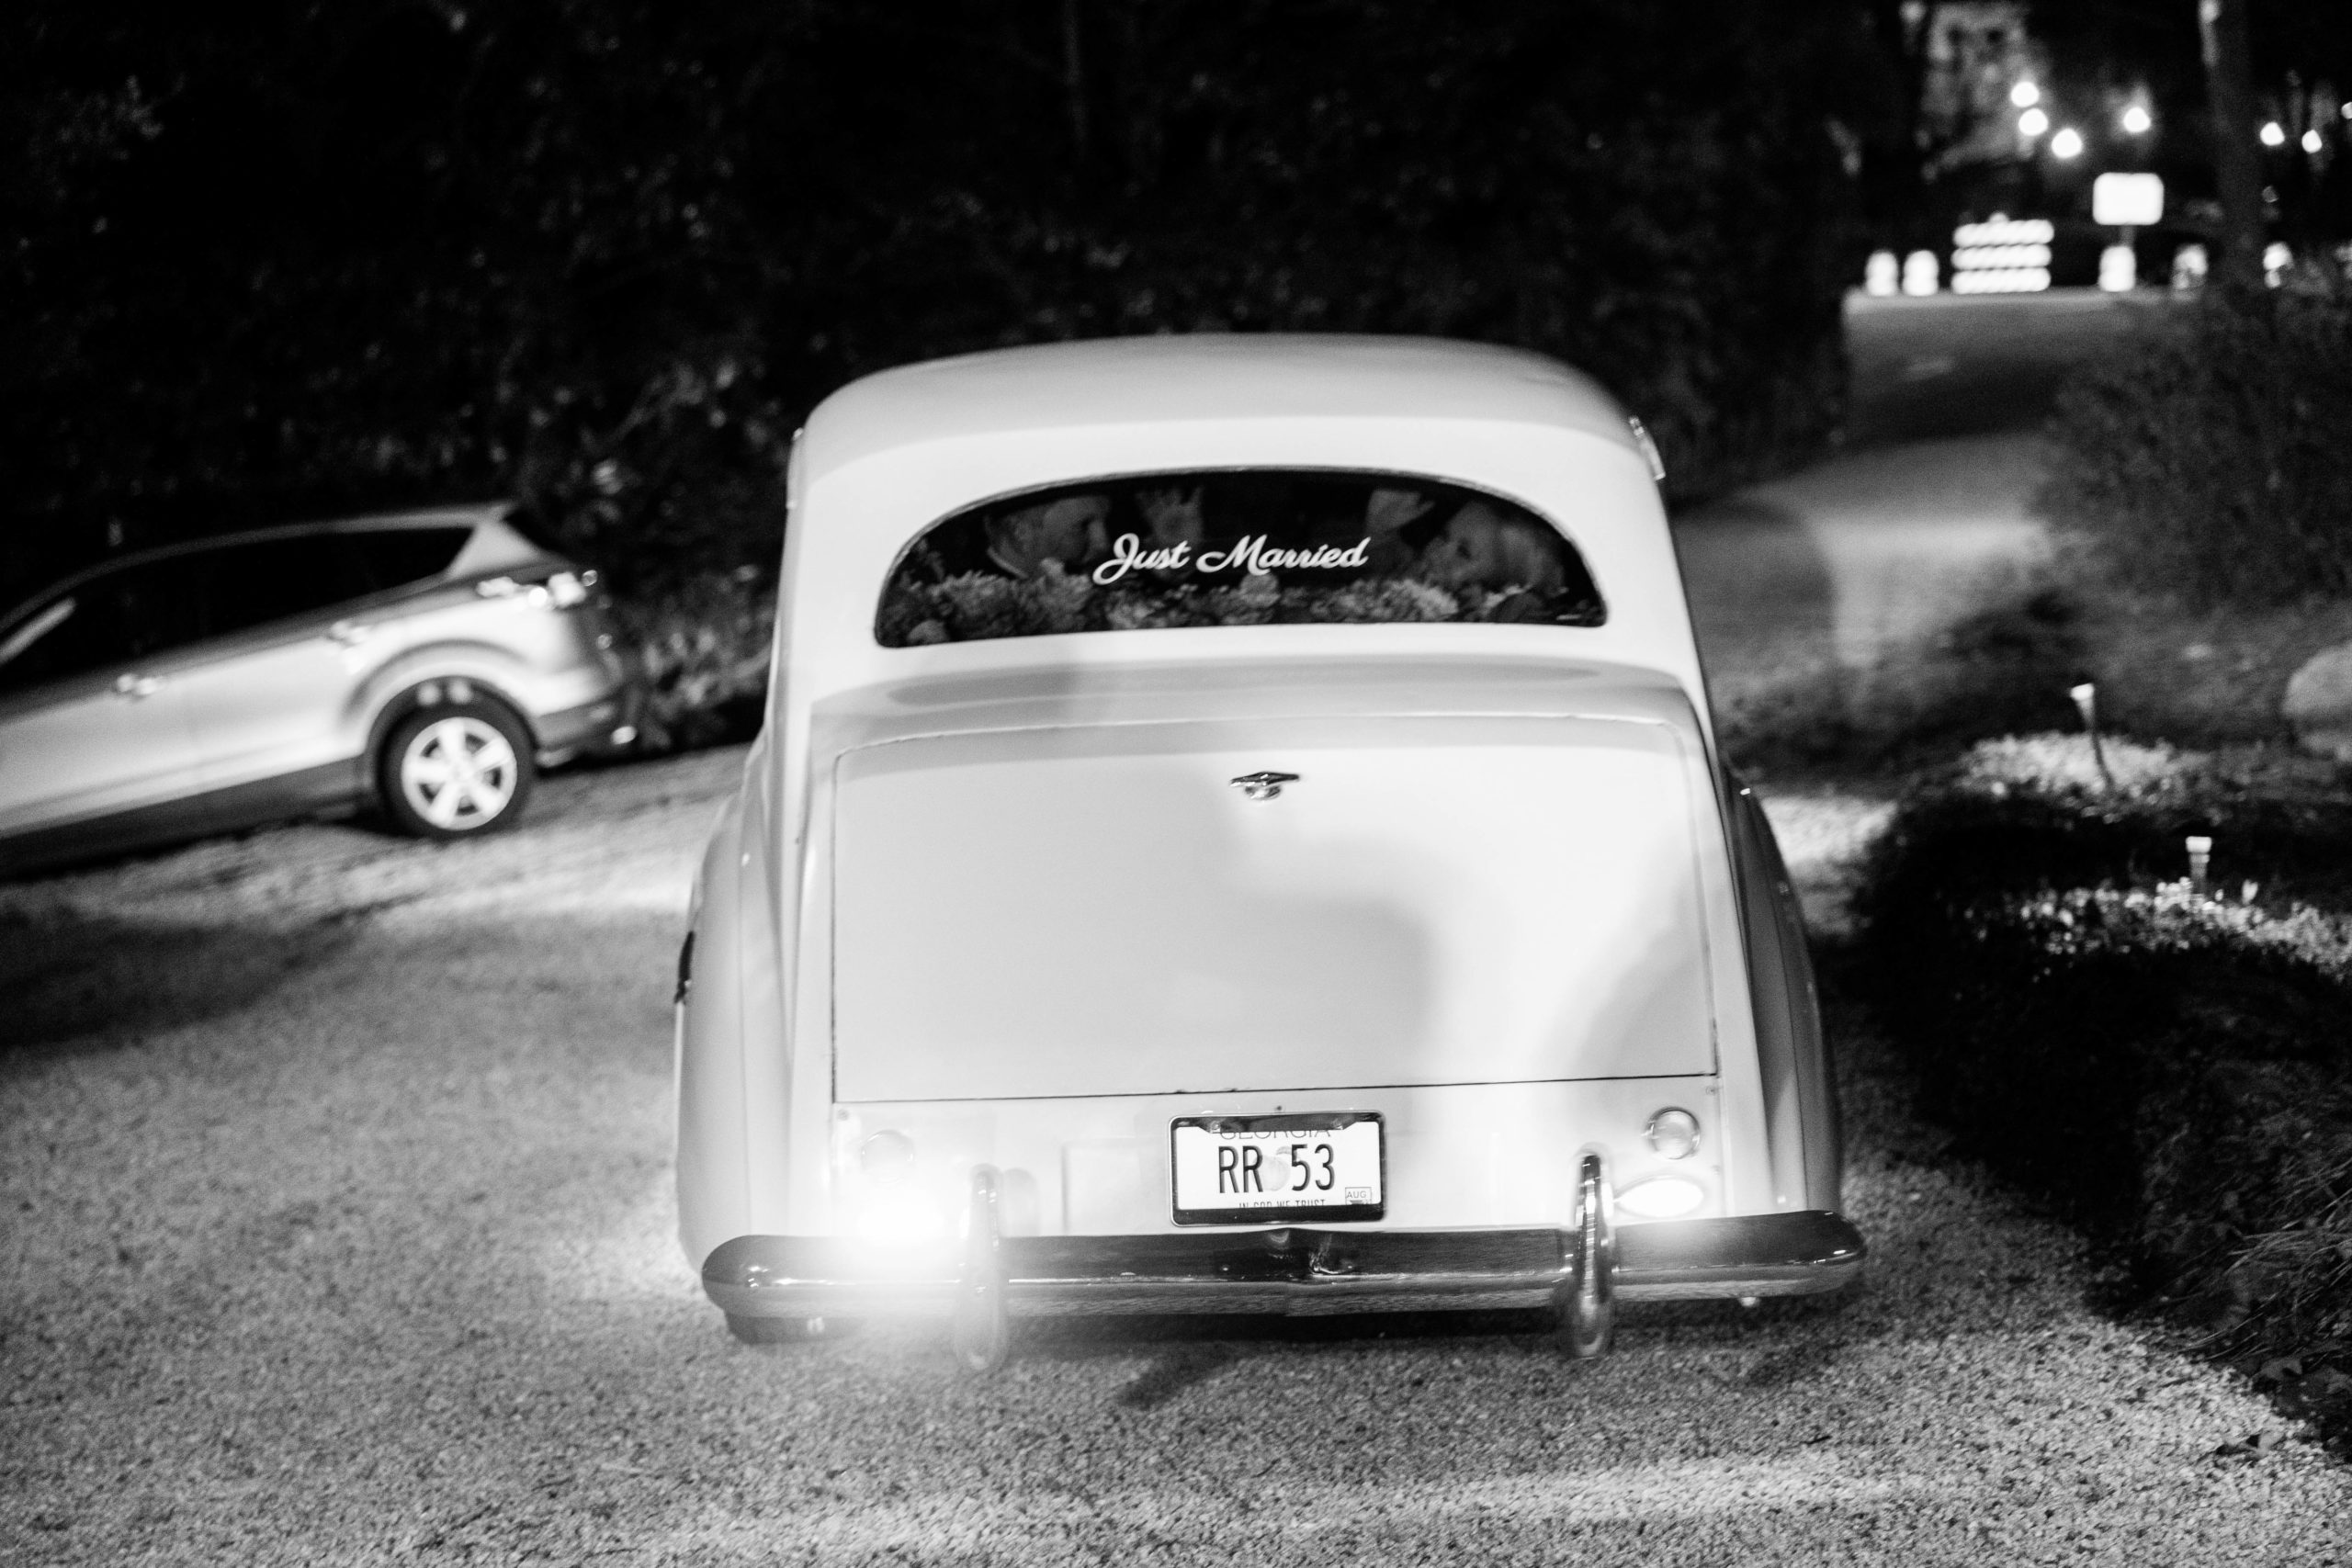 Eleanor Stenner Photography - a Birmingham, Alabama Wedding Photographer - photographed the Leake wedding at Primrose Cottage in Roswell, Georgia